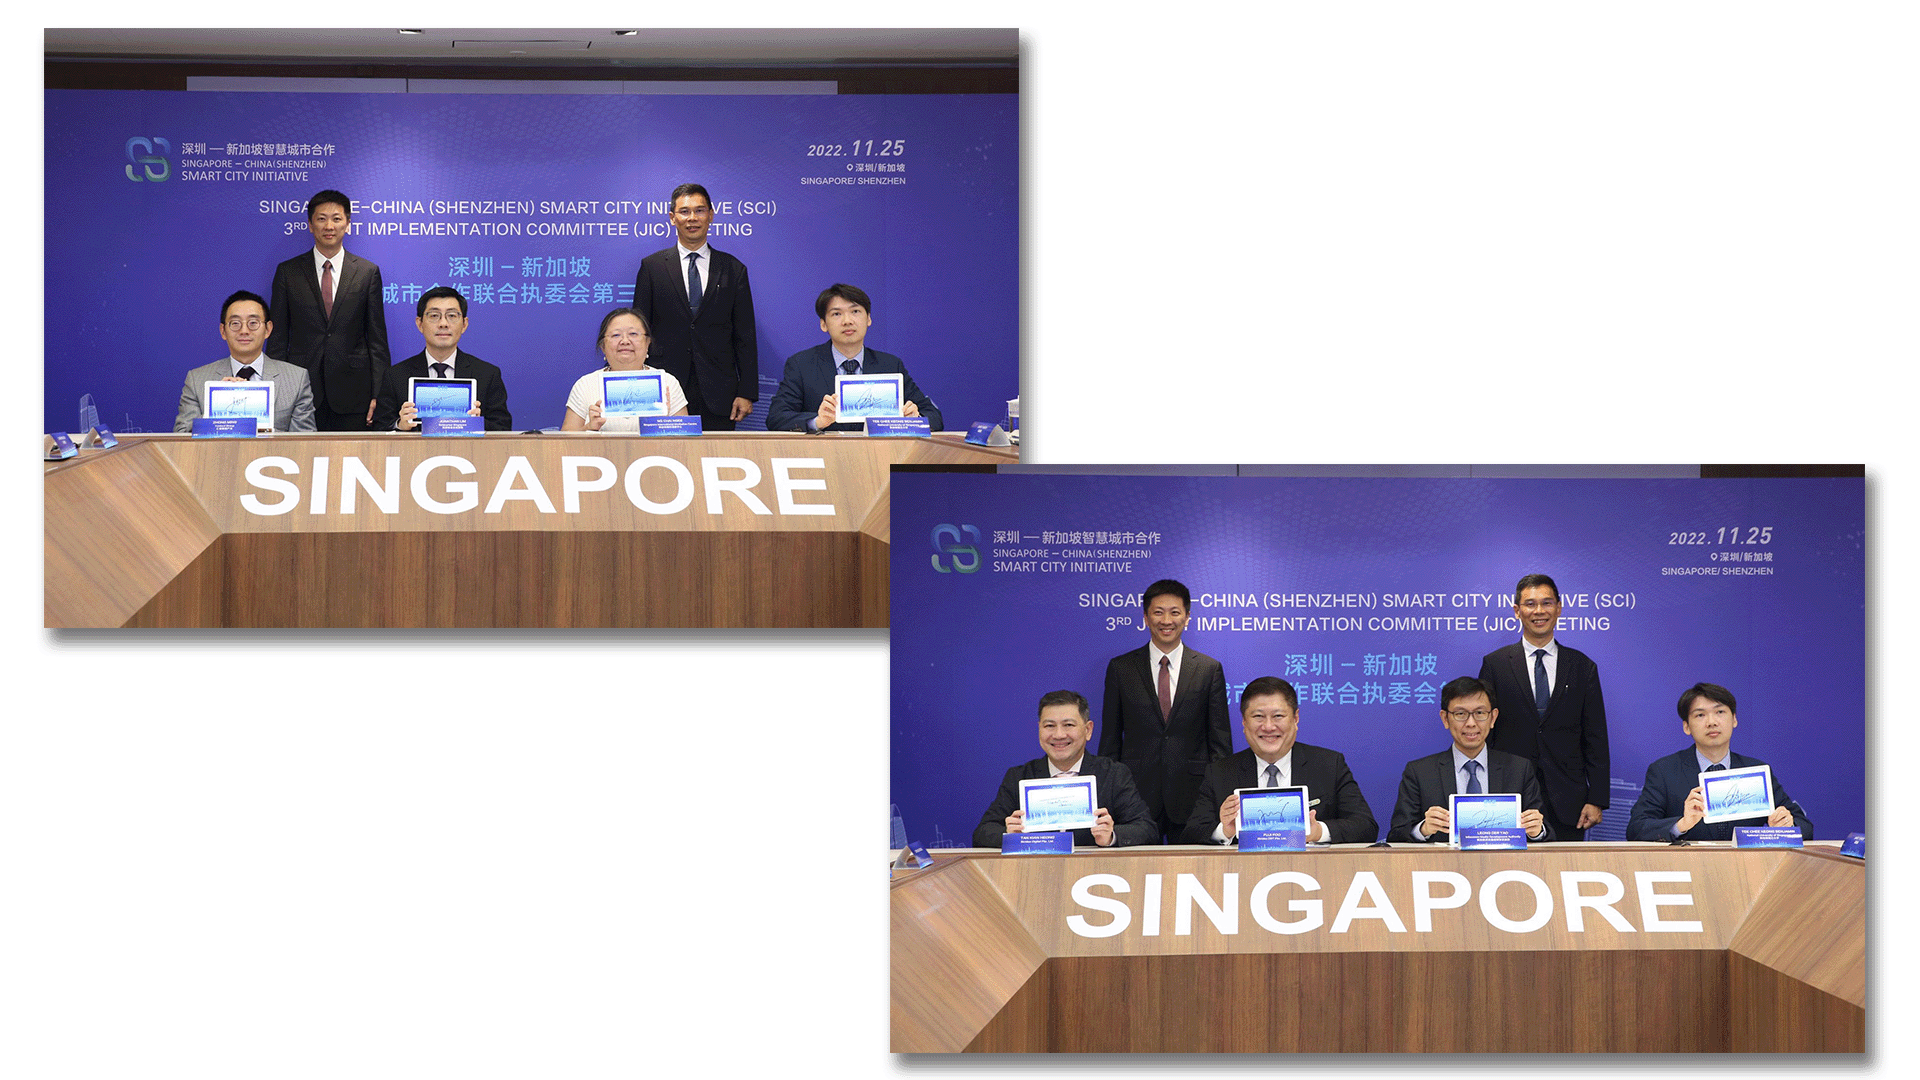 The MOUs were signed on behalf of NUS by Assoc Prof Benjamin Tee Chee Keong, Vice Dean Research, CDE (far right, both photos)